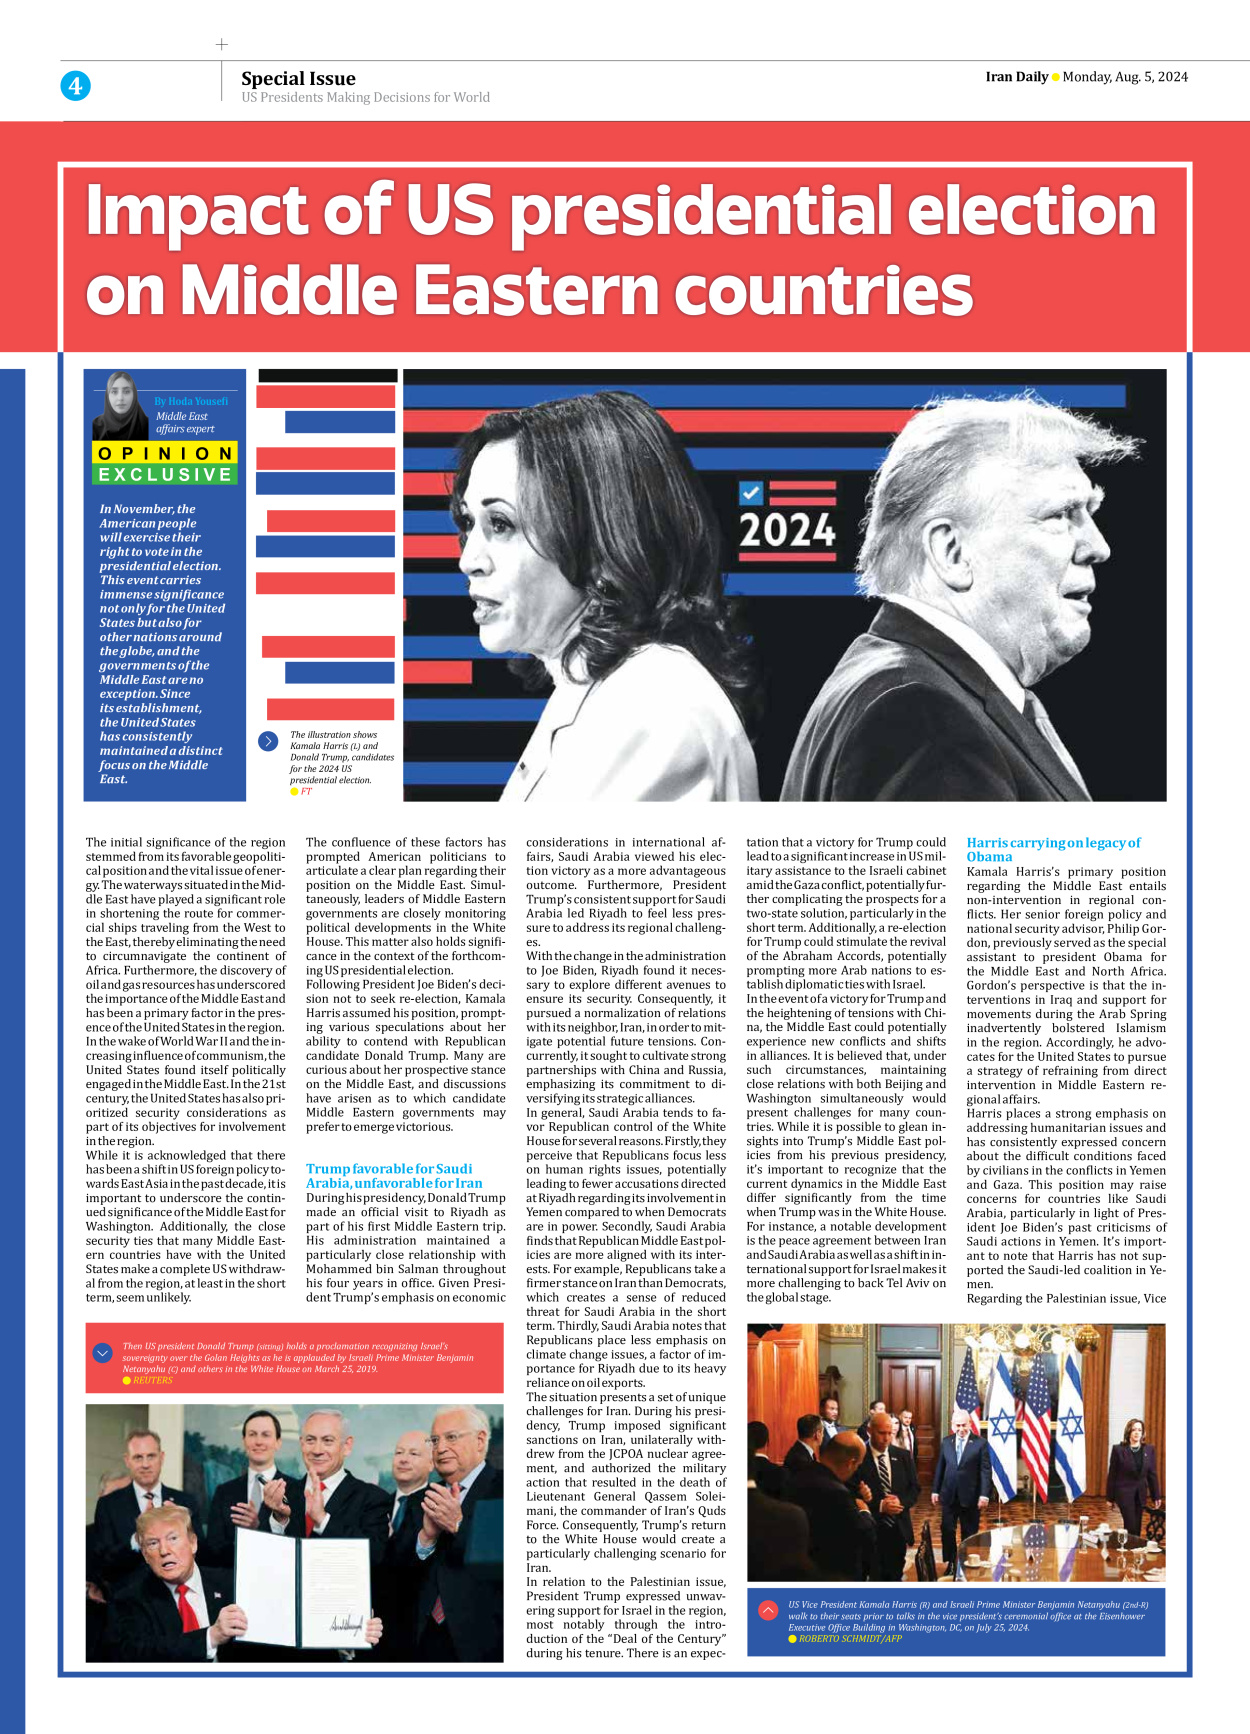 Iran Daily - Number Seven Thousand Six Hundred and Twenty - 05 August 2024 - Page 4